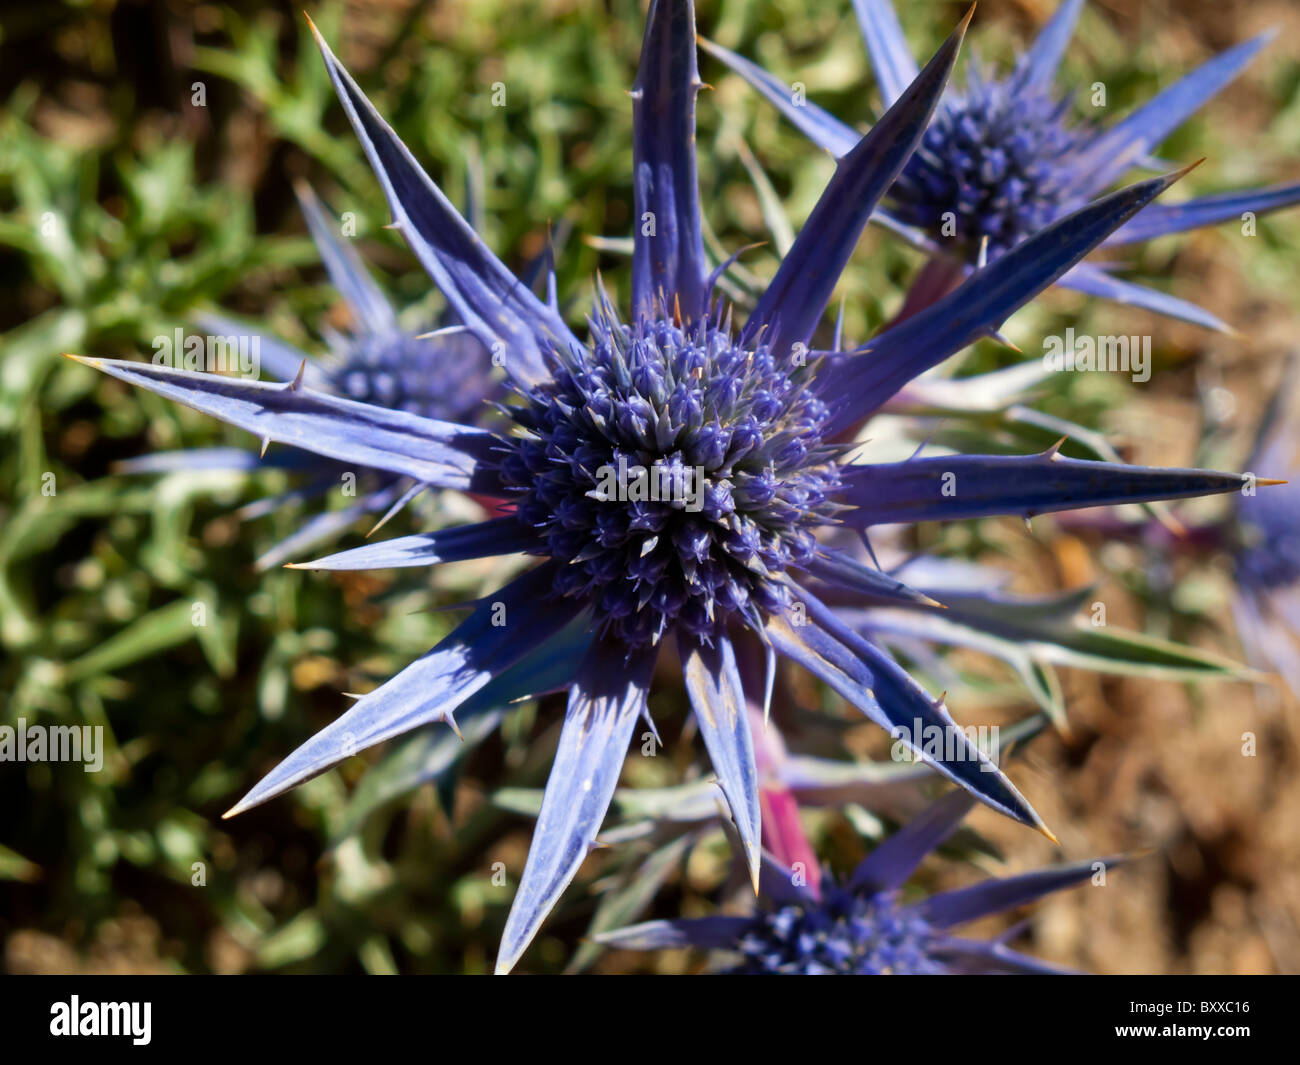 Mediterranean Sea Holly Eryngium bourgatii Apiaceae wild flowers growing in the Picos de Europa mountains in northern Spain Stock Photo